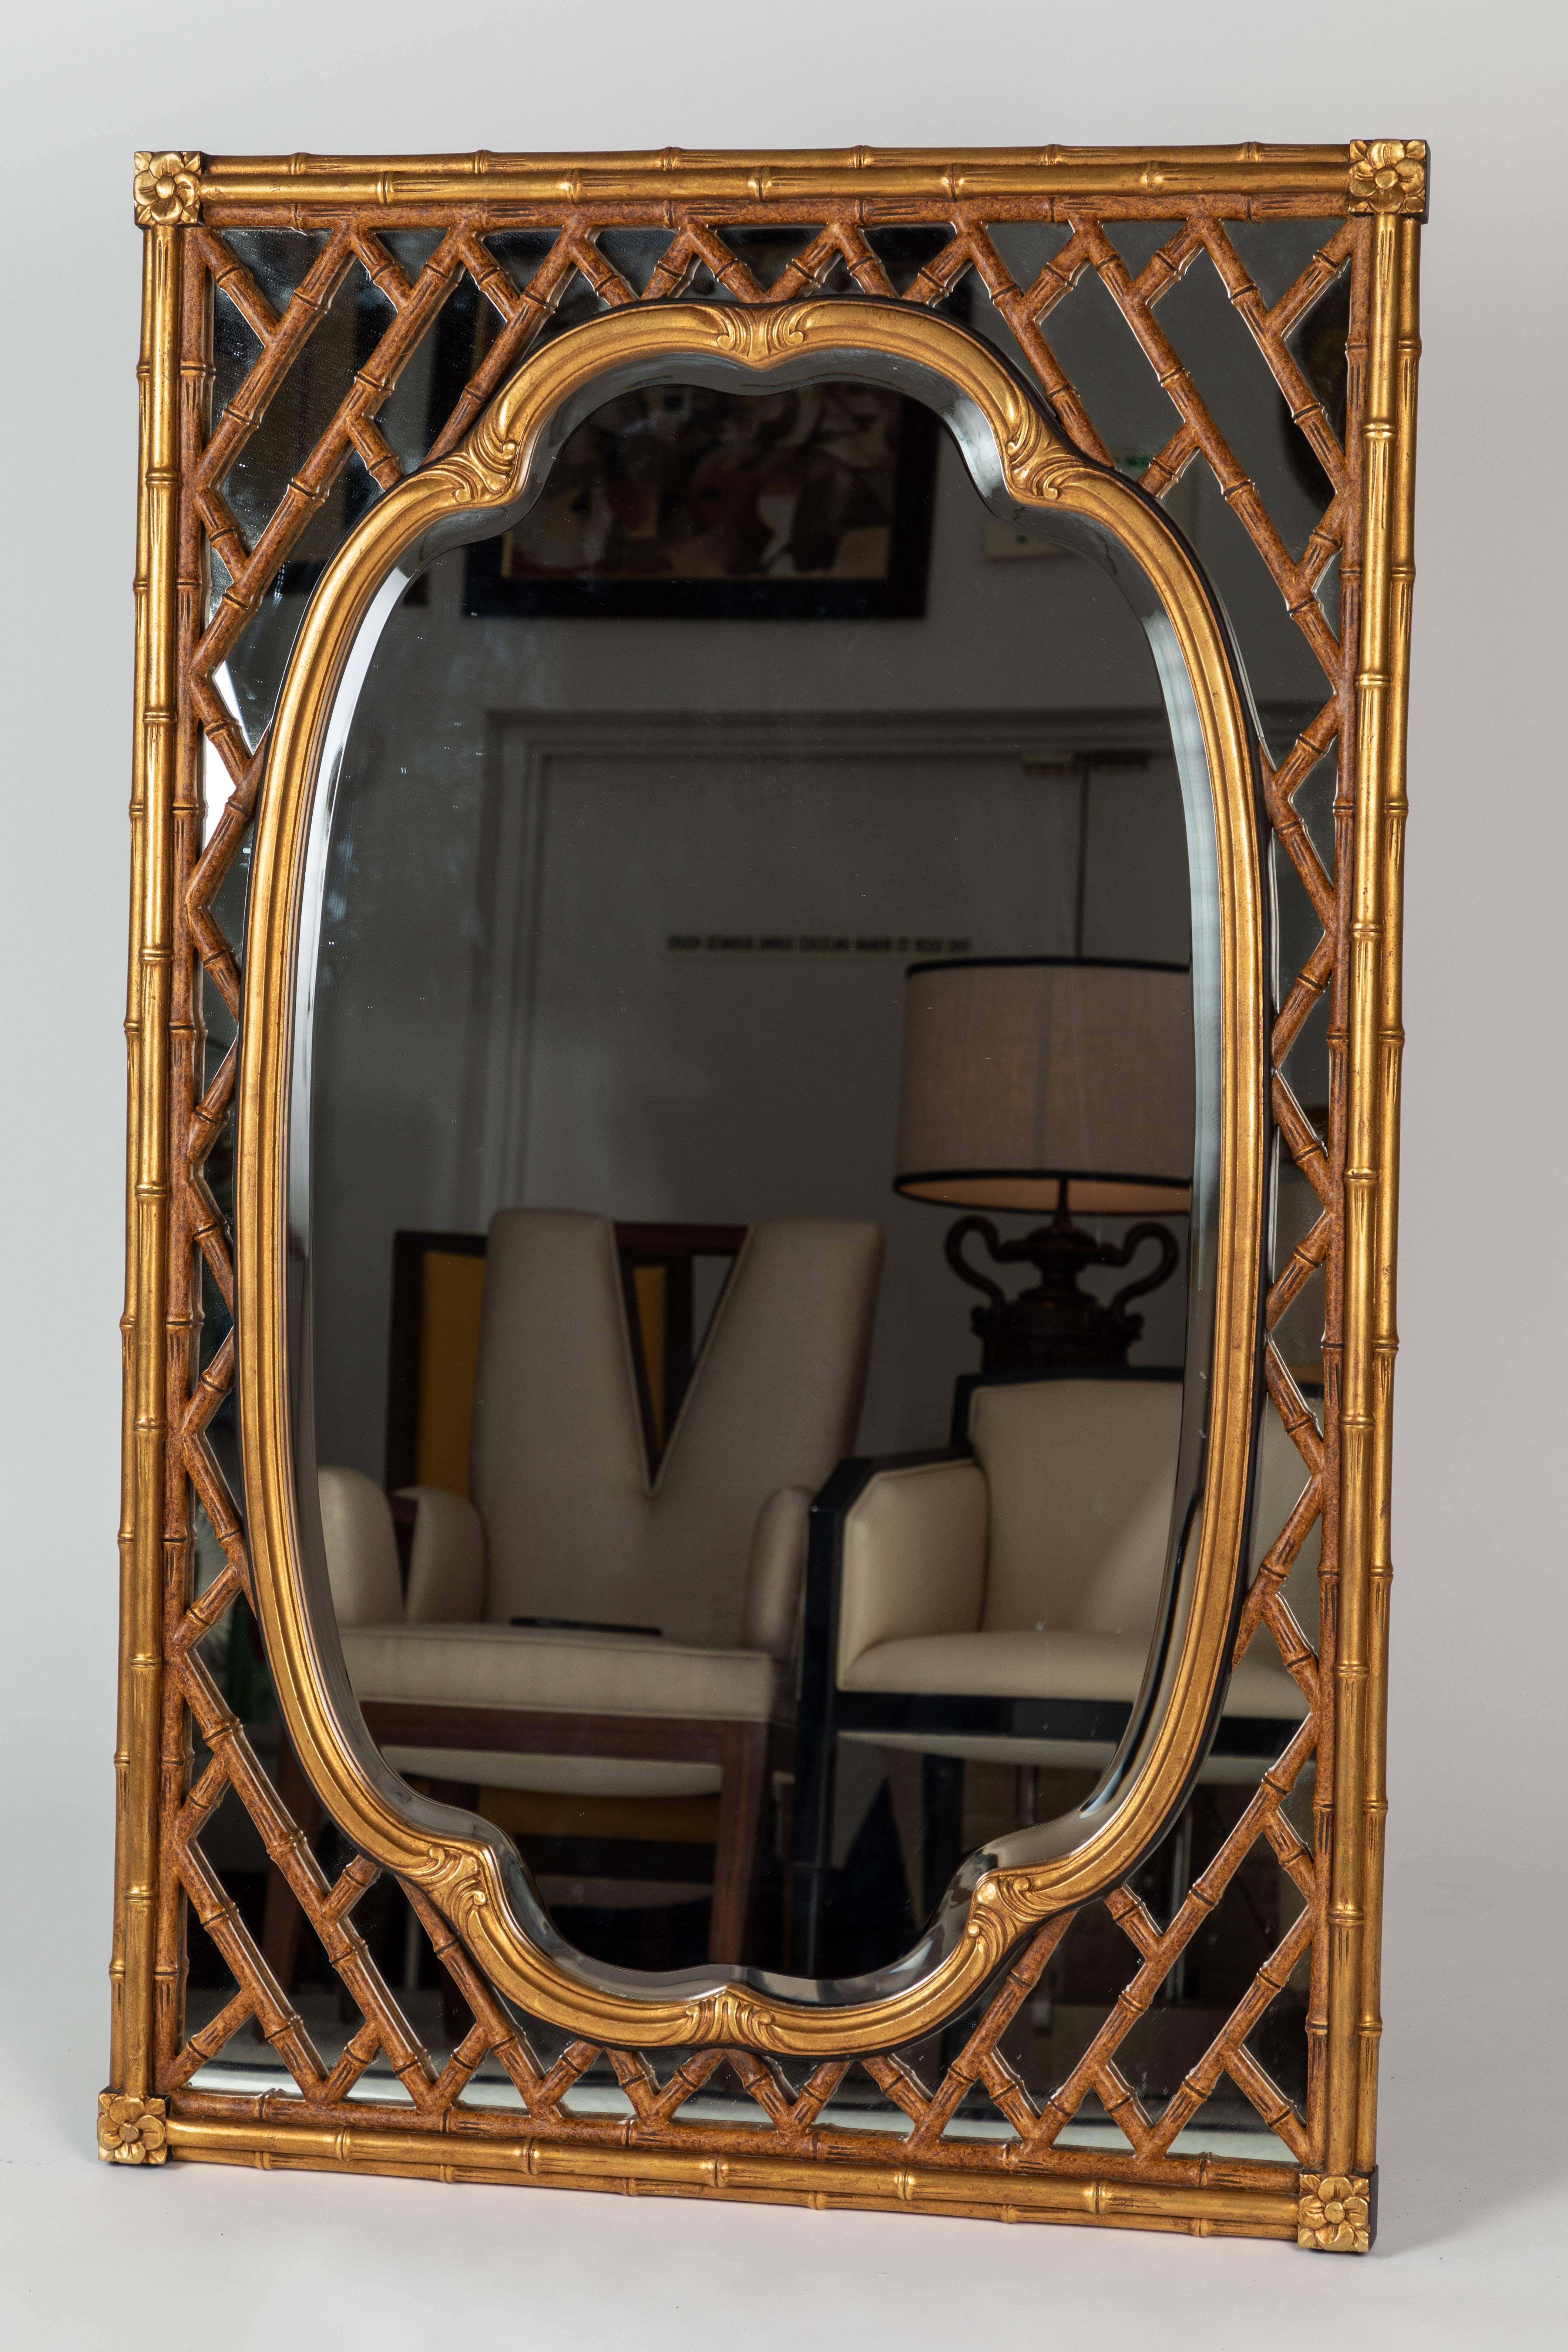 An exquisite pair of bamboo-framed wall mirrors by Mirror Fair for Baker Knapp & Tubbs. 

These rectangular mirrors are framed by a bamboo frame (in manner of a lattice-work design) that highlights the oval-shaped mirror in the centre of the